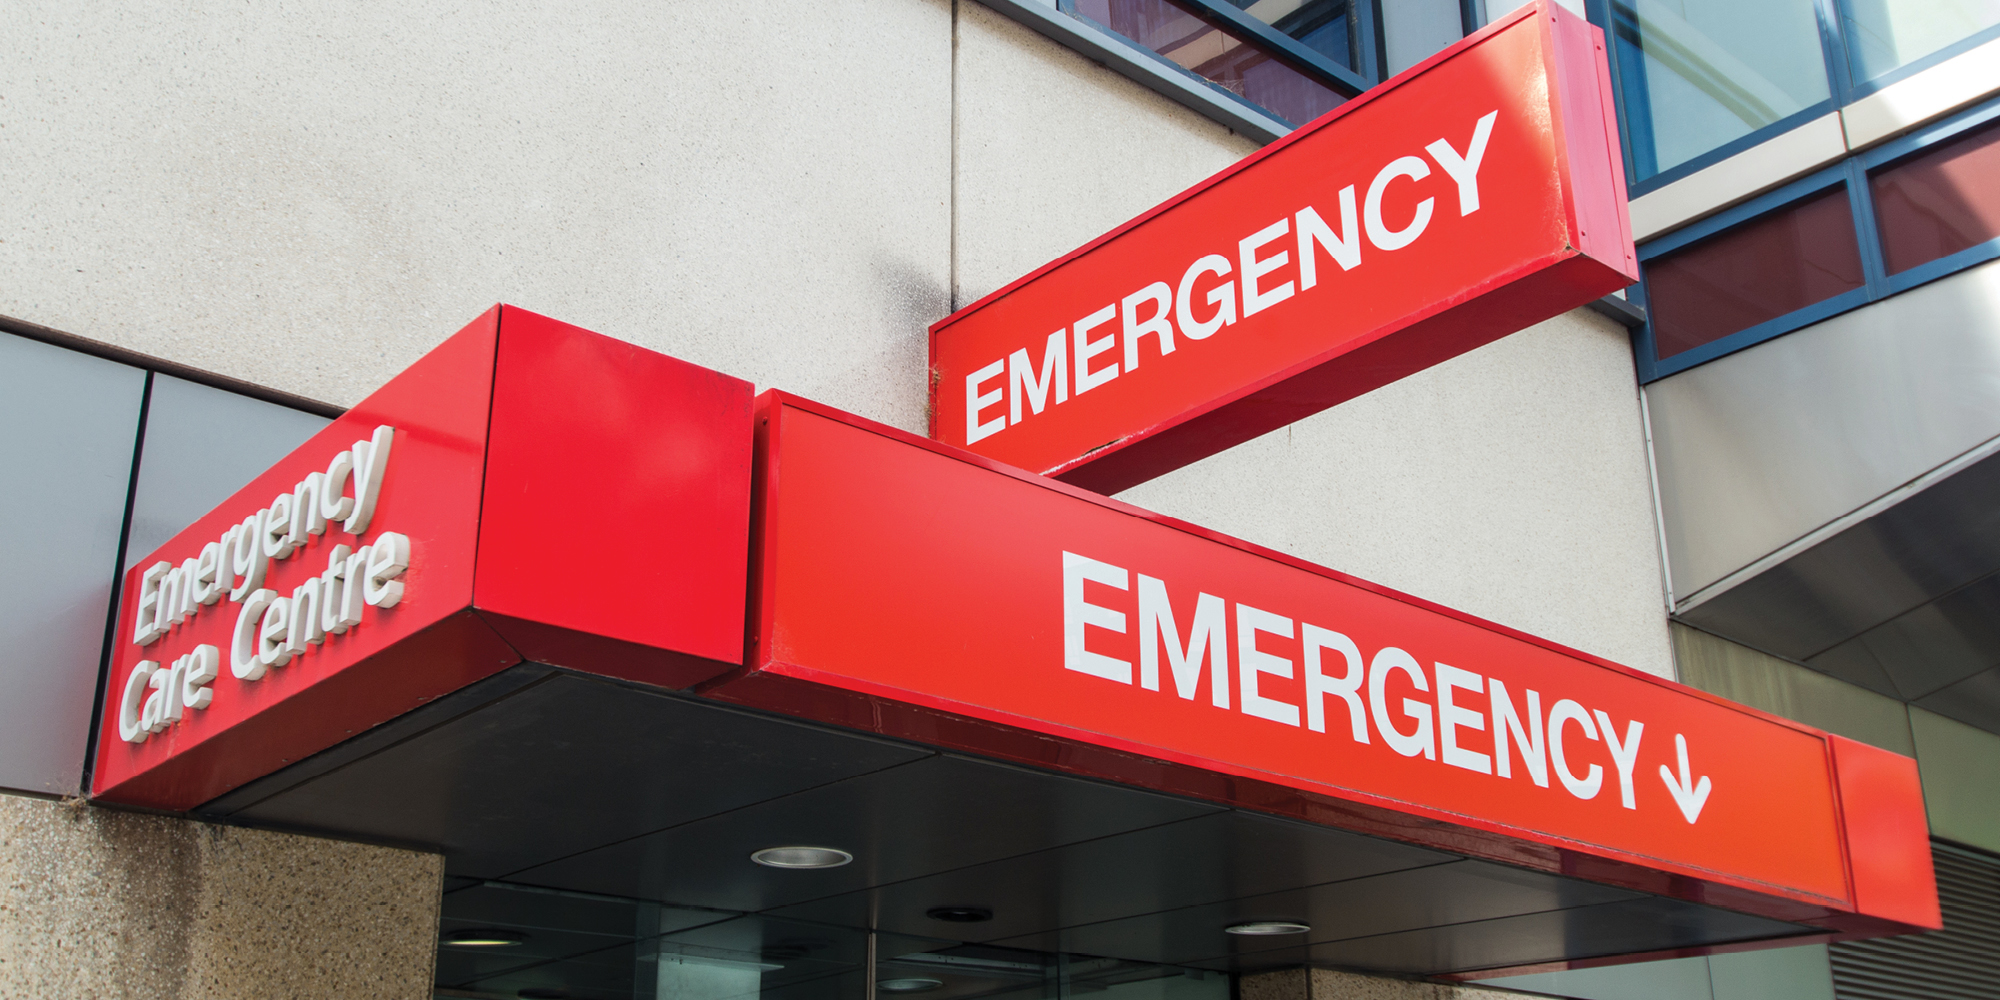 Emergency department signs